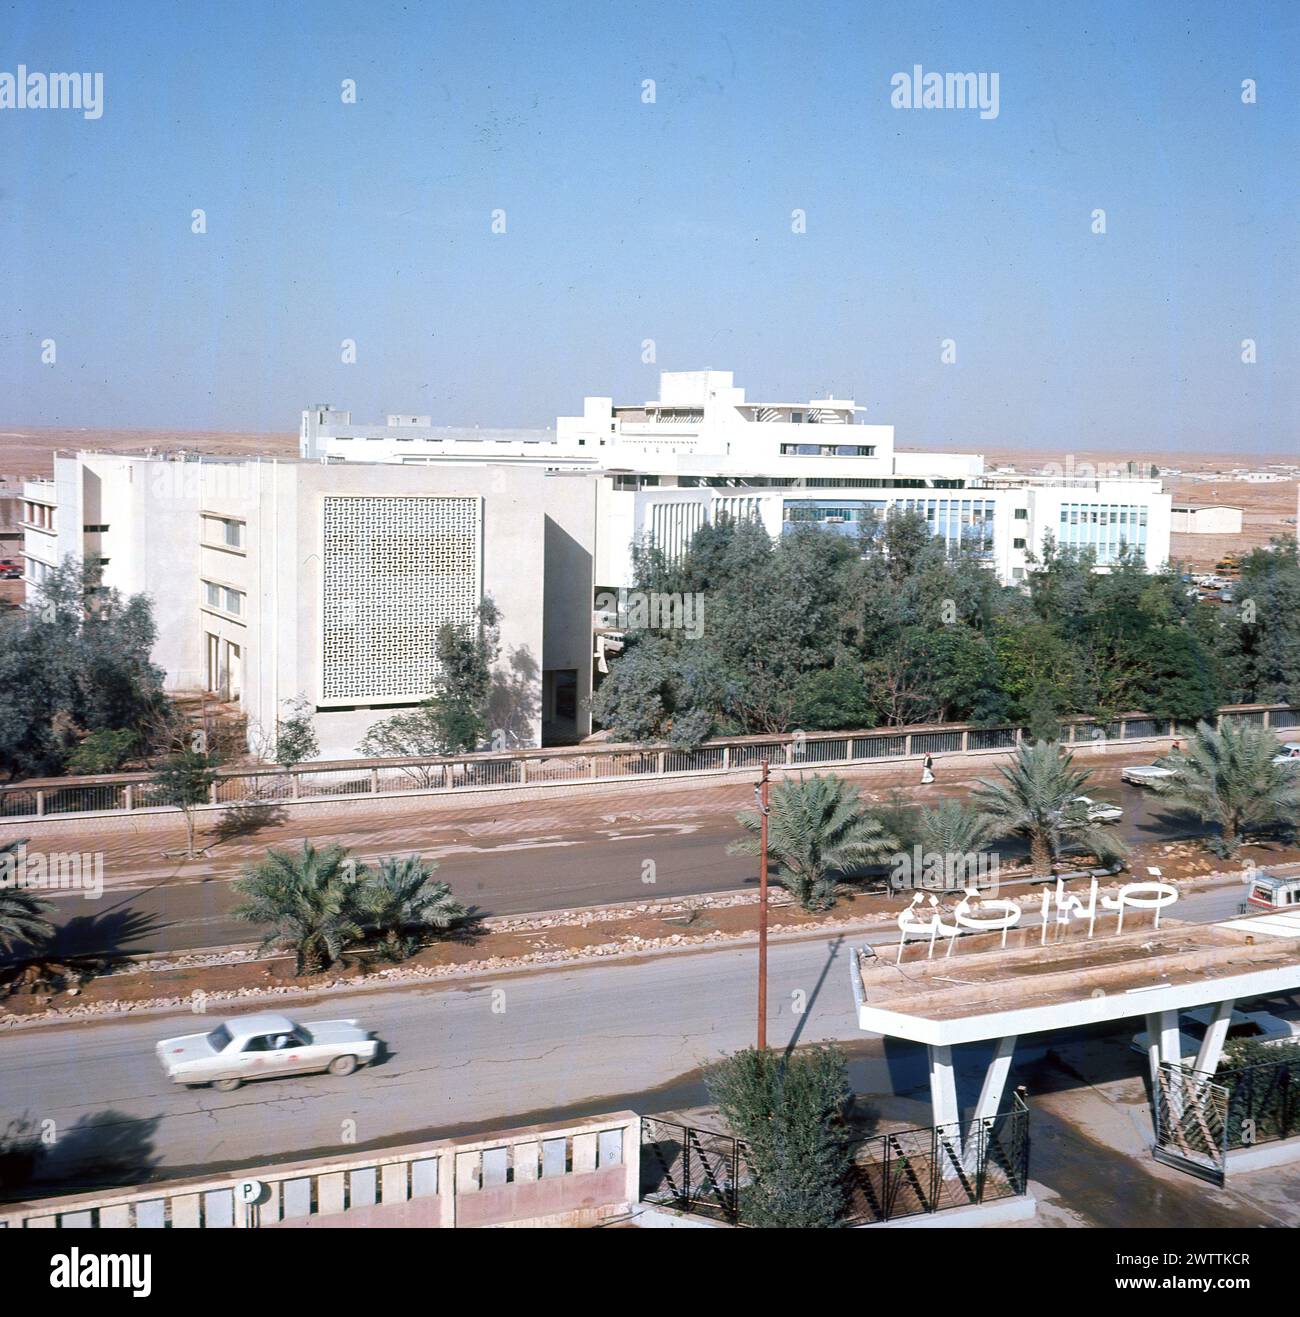 1960s, historical, exterior view of the Ministry of Interior building at Riyadh, Saudi Arabia. The ministry was establised in 1926 by King Abdulaziz as a government dept to oversee national security, at a time of political unrest and tribal conflicts, with the aim to achieve safety and stabliity for its citizens. In 1953 King Saud moved all the government depts from Mecca to Riyadh and new ministry buildings were constructed, together with a new suburbs to house the staff and so the small desert city was transformed into a modern capital city, on a scale and at a speed hitherto unseen before. Stock Photo